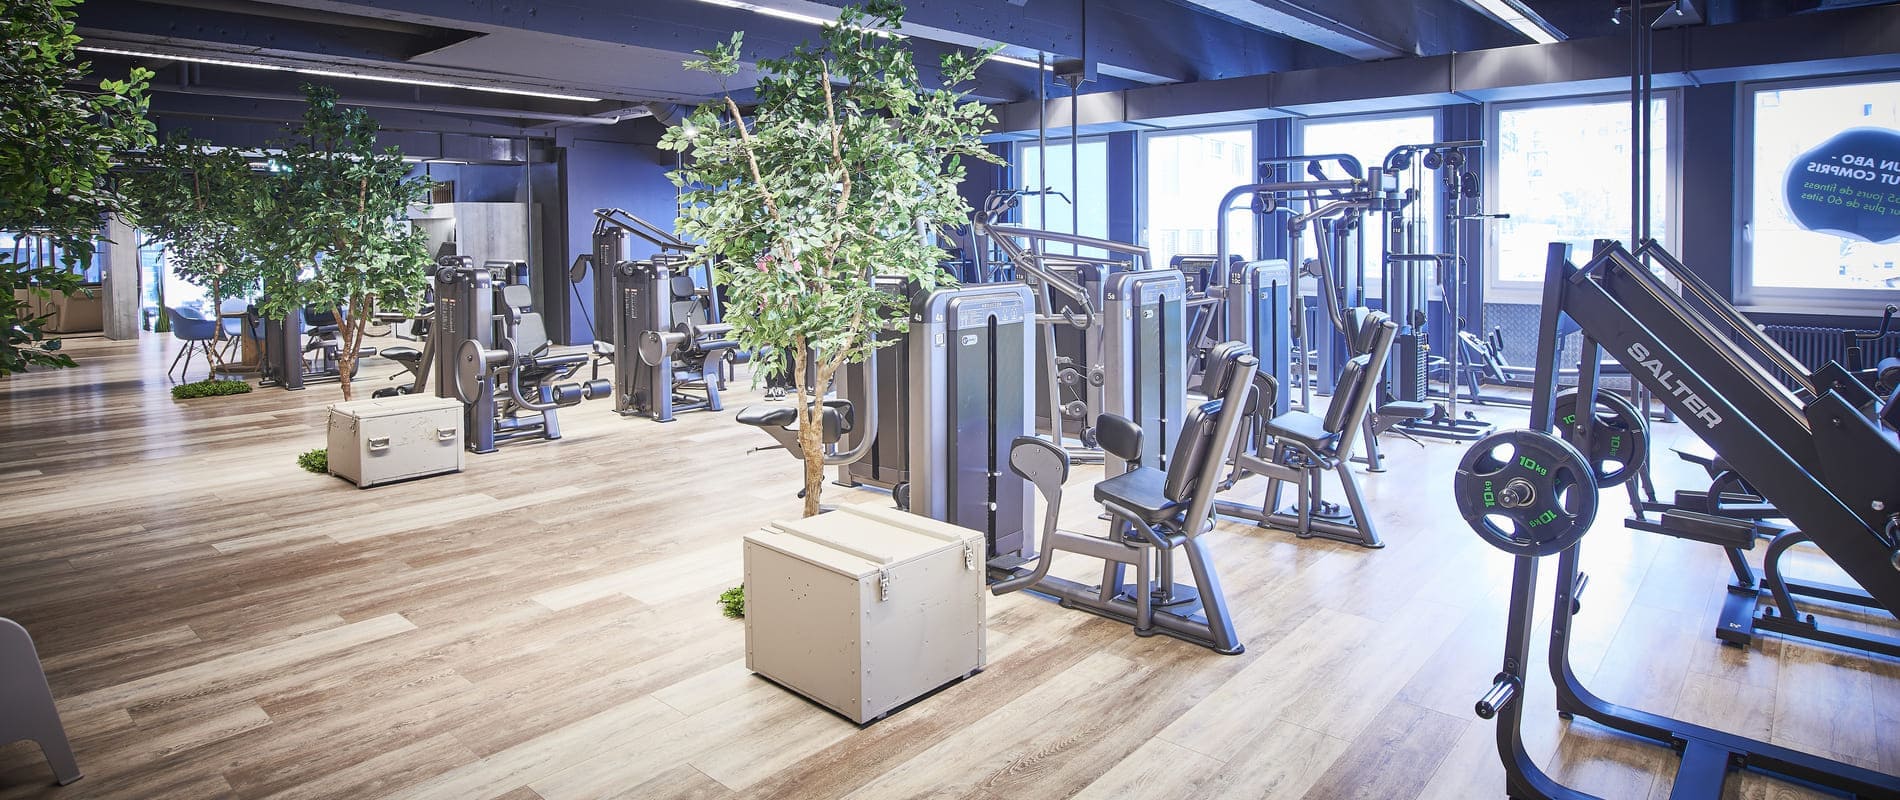 update Fitness Lausanne / Domaine : musculation